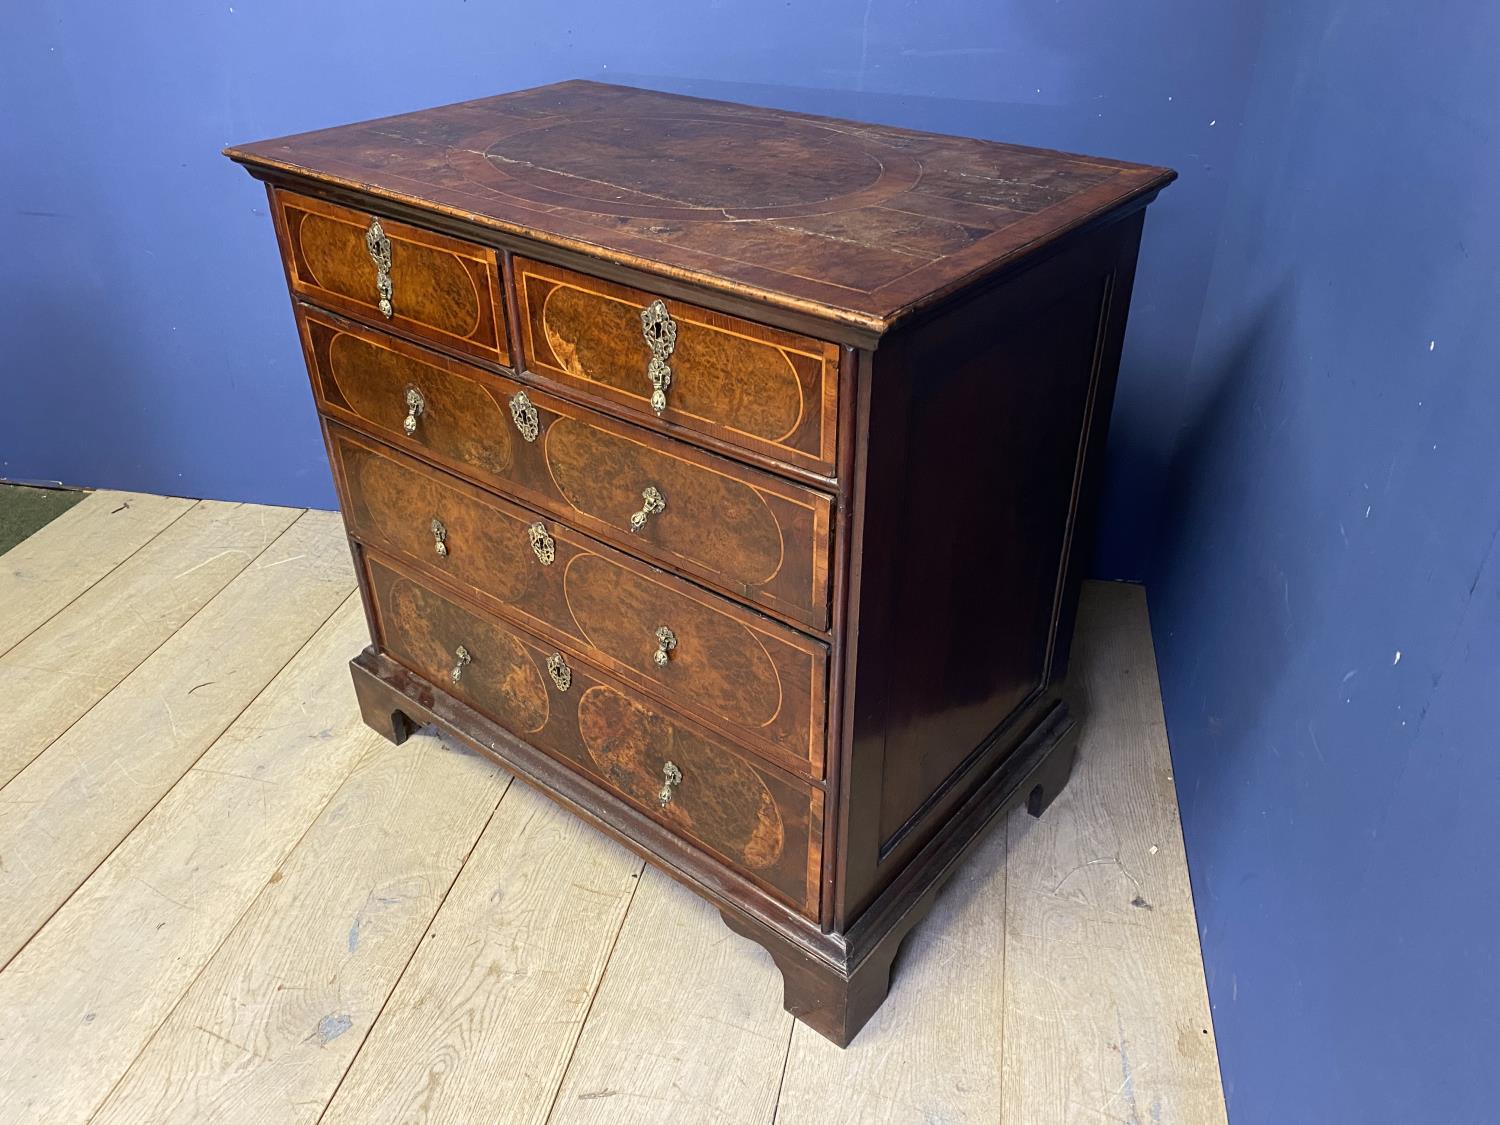 Georgian cross-banded & inlaid walnut chest, 3 long & 2 short graduated drawers, 92.5h x 97w x 59d - Image 3 of 5